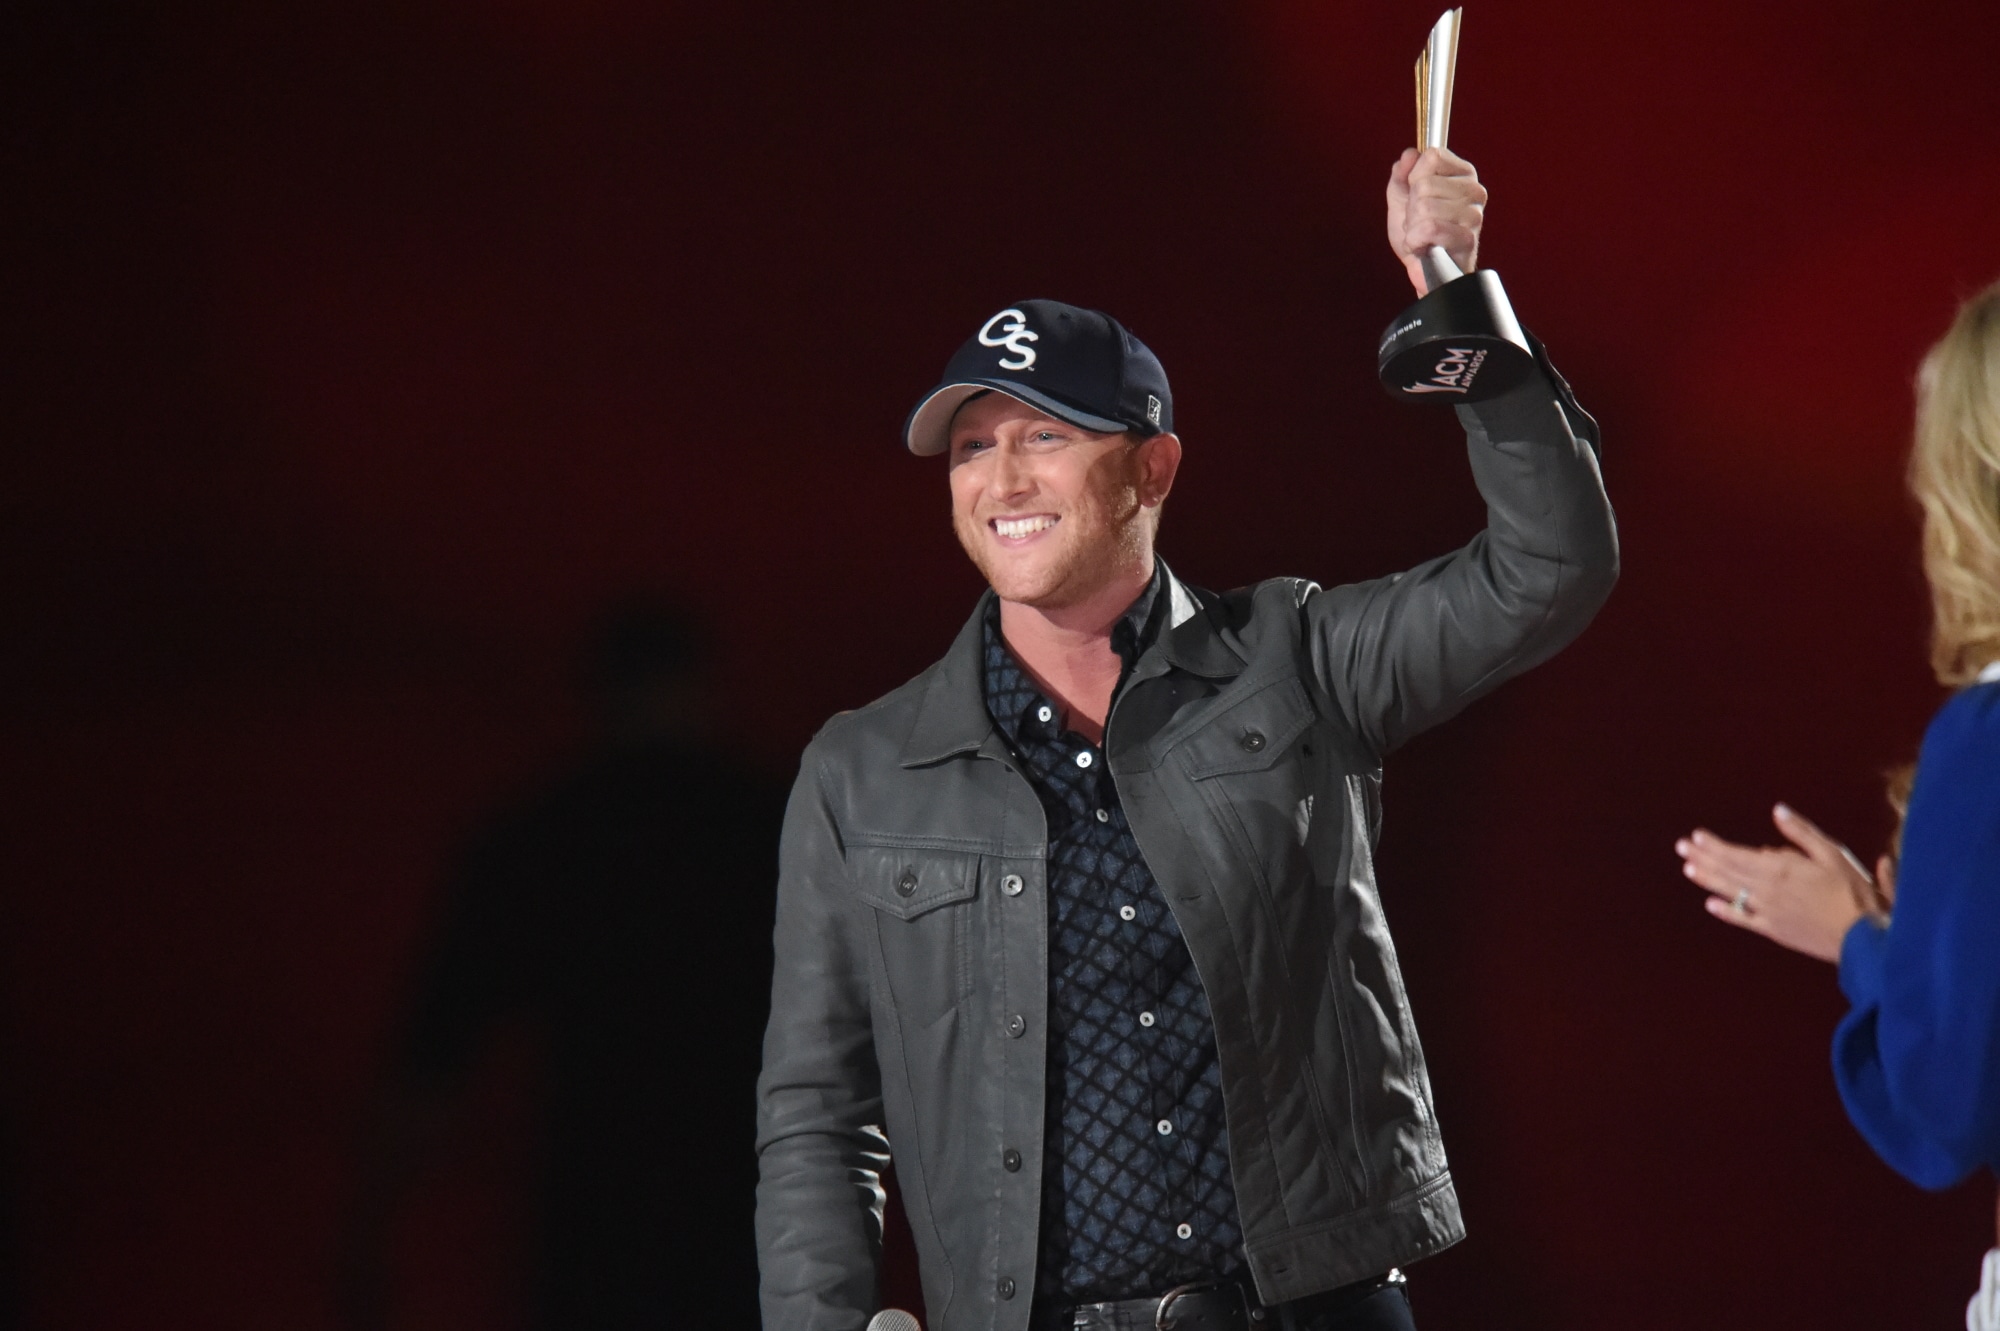 ARLINGTON - APRIL 19: New Artist of the Year Cole Swindell at the 50TH ACADEMY OF COUNTRY MUSIC AWARDS, from AT&T Stadium in Arlington, Texas, on Sunday, April 19, 2015 (8:00-11:30 PM, live ET/delayed PT) on the CBS Television Network. (Photo by Heather Wines/CBS via Getty Images)